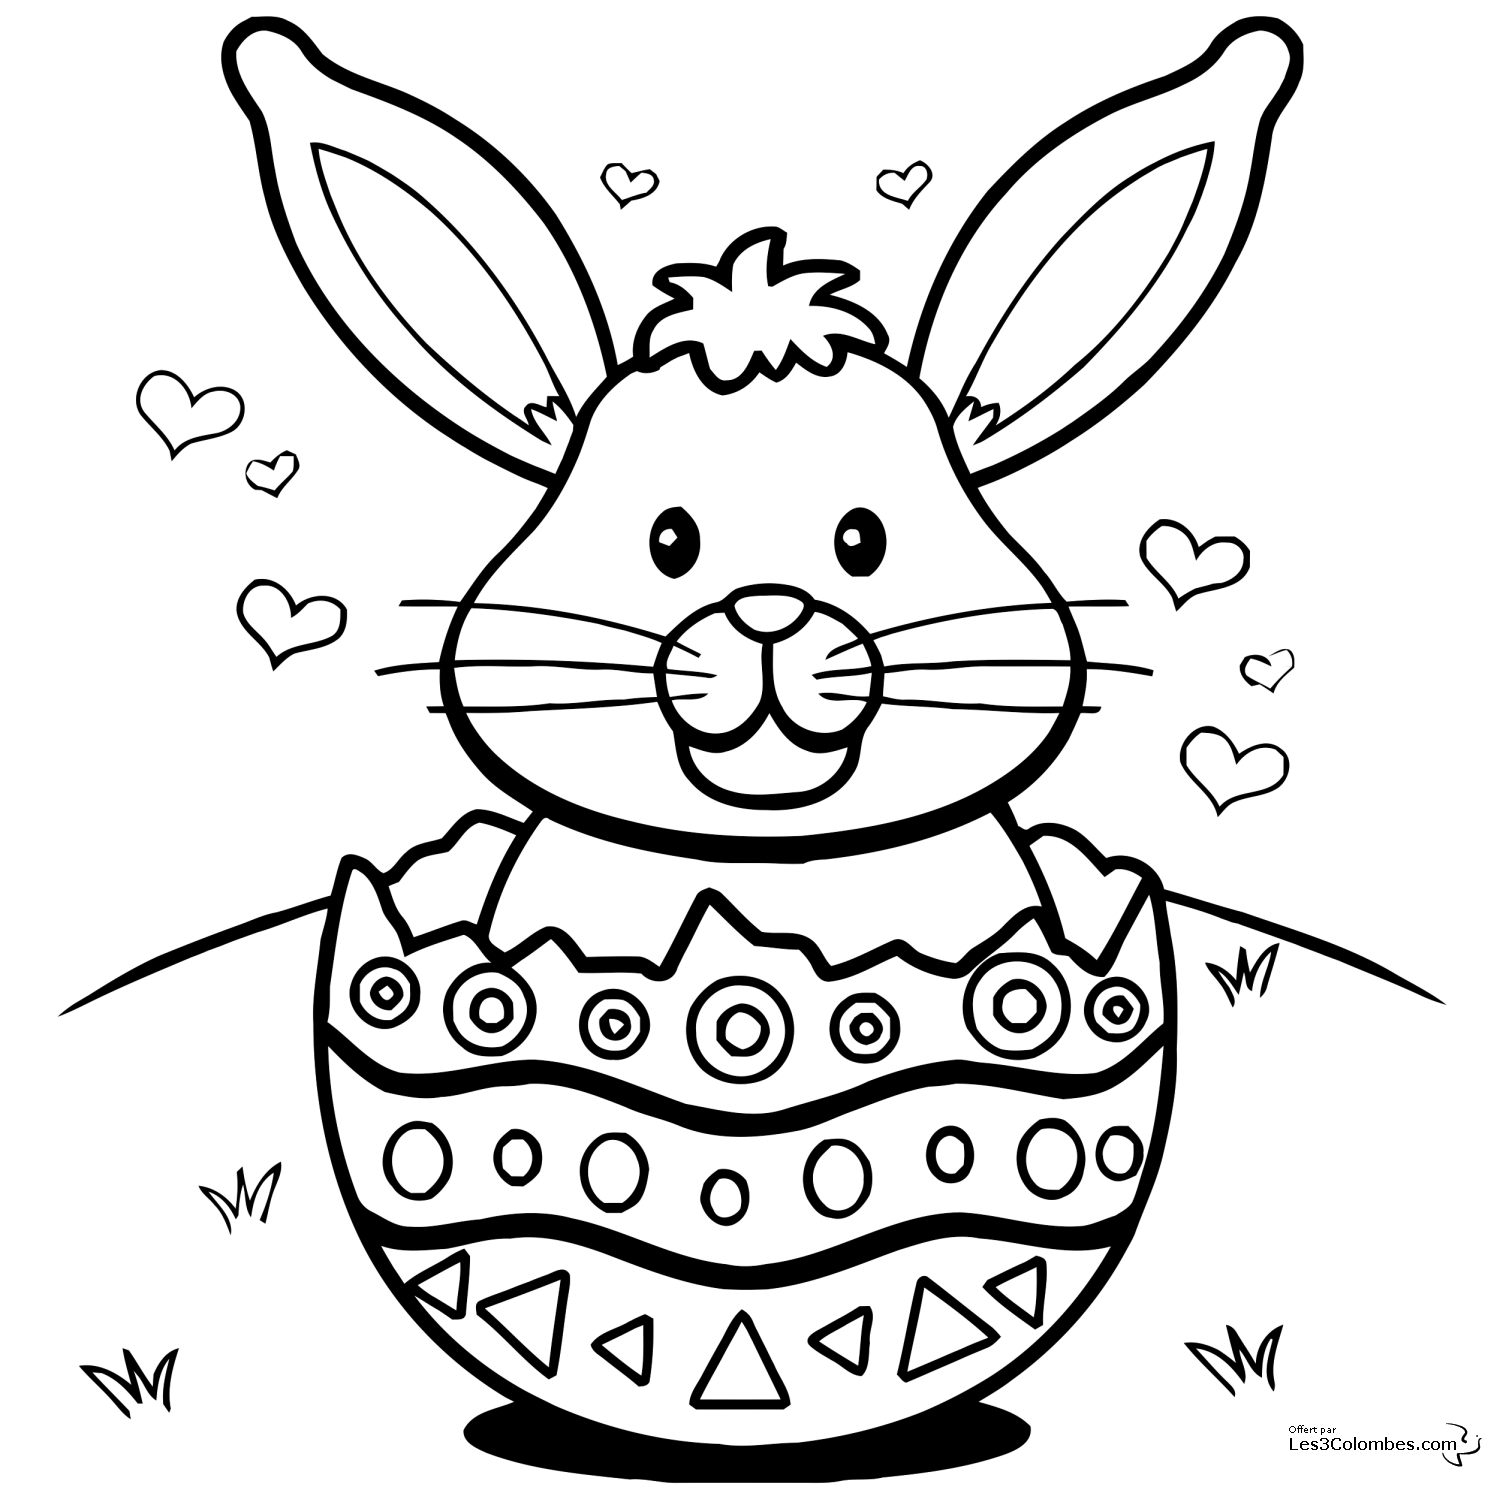 Very simple Easter egg and bunny coloring page